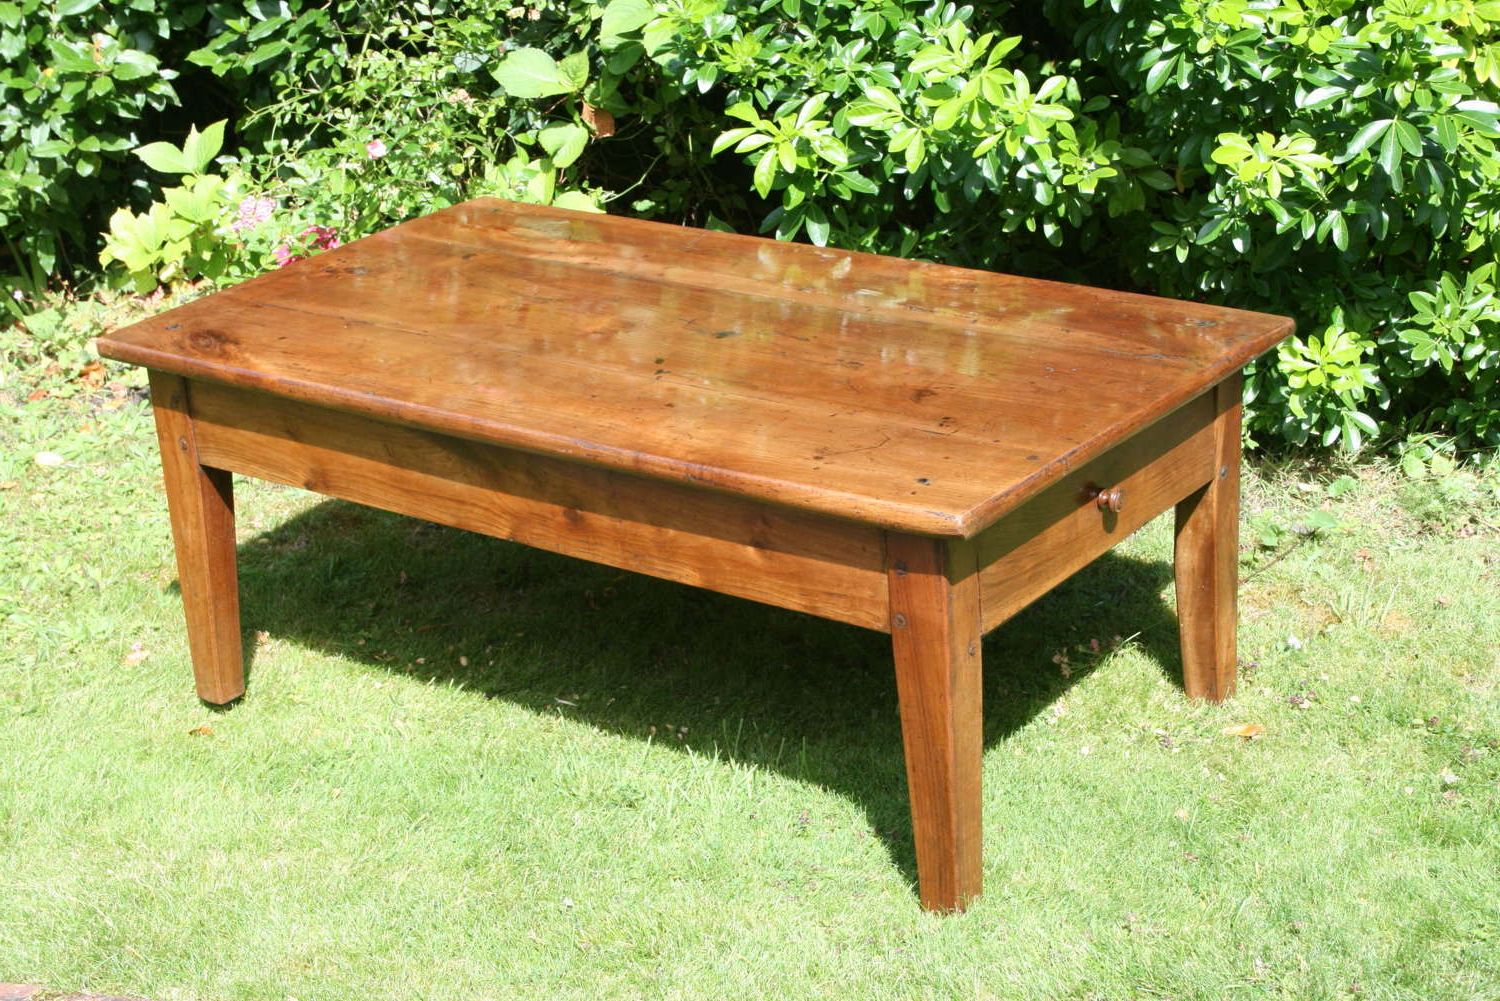 French Cherry Wood Coffee Table In Most Recent Heartwood Cherry Wood Coffee Tables (View 9 of 20)